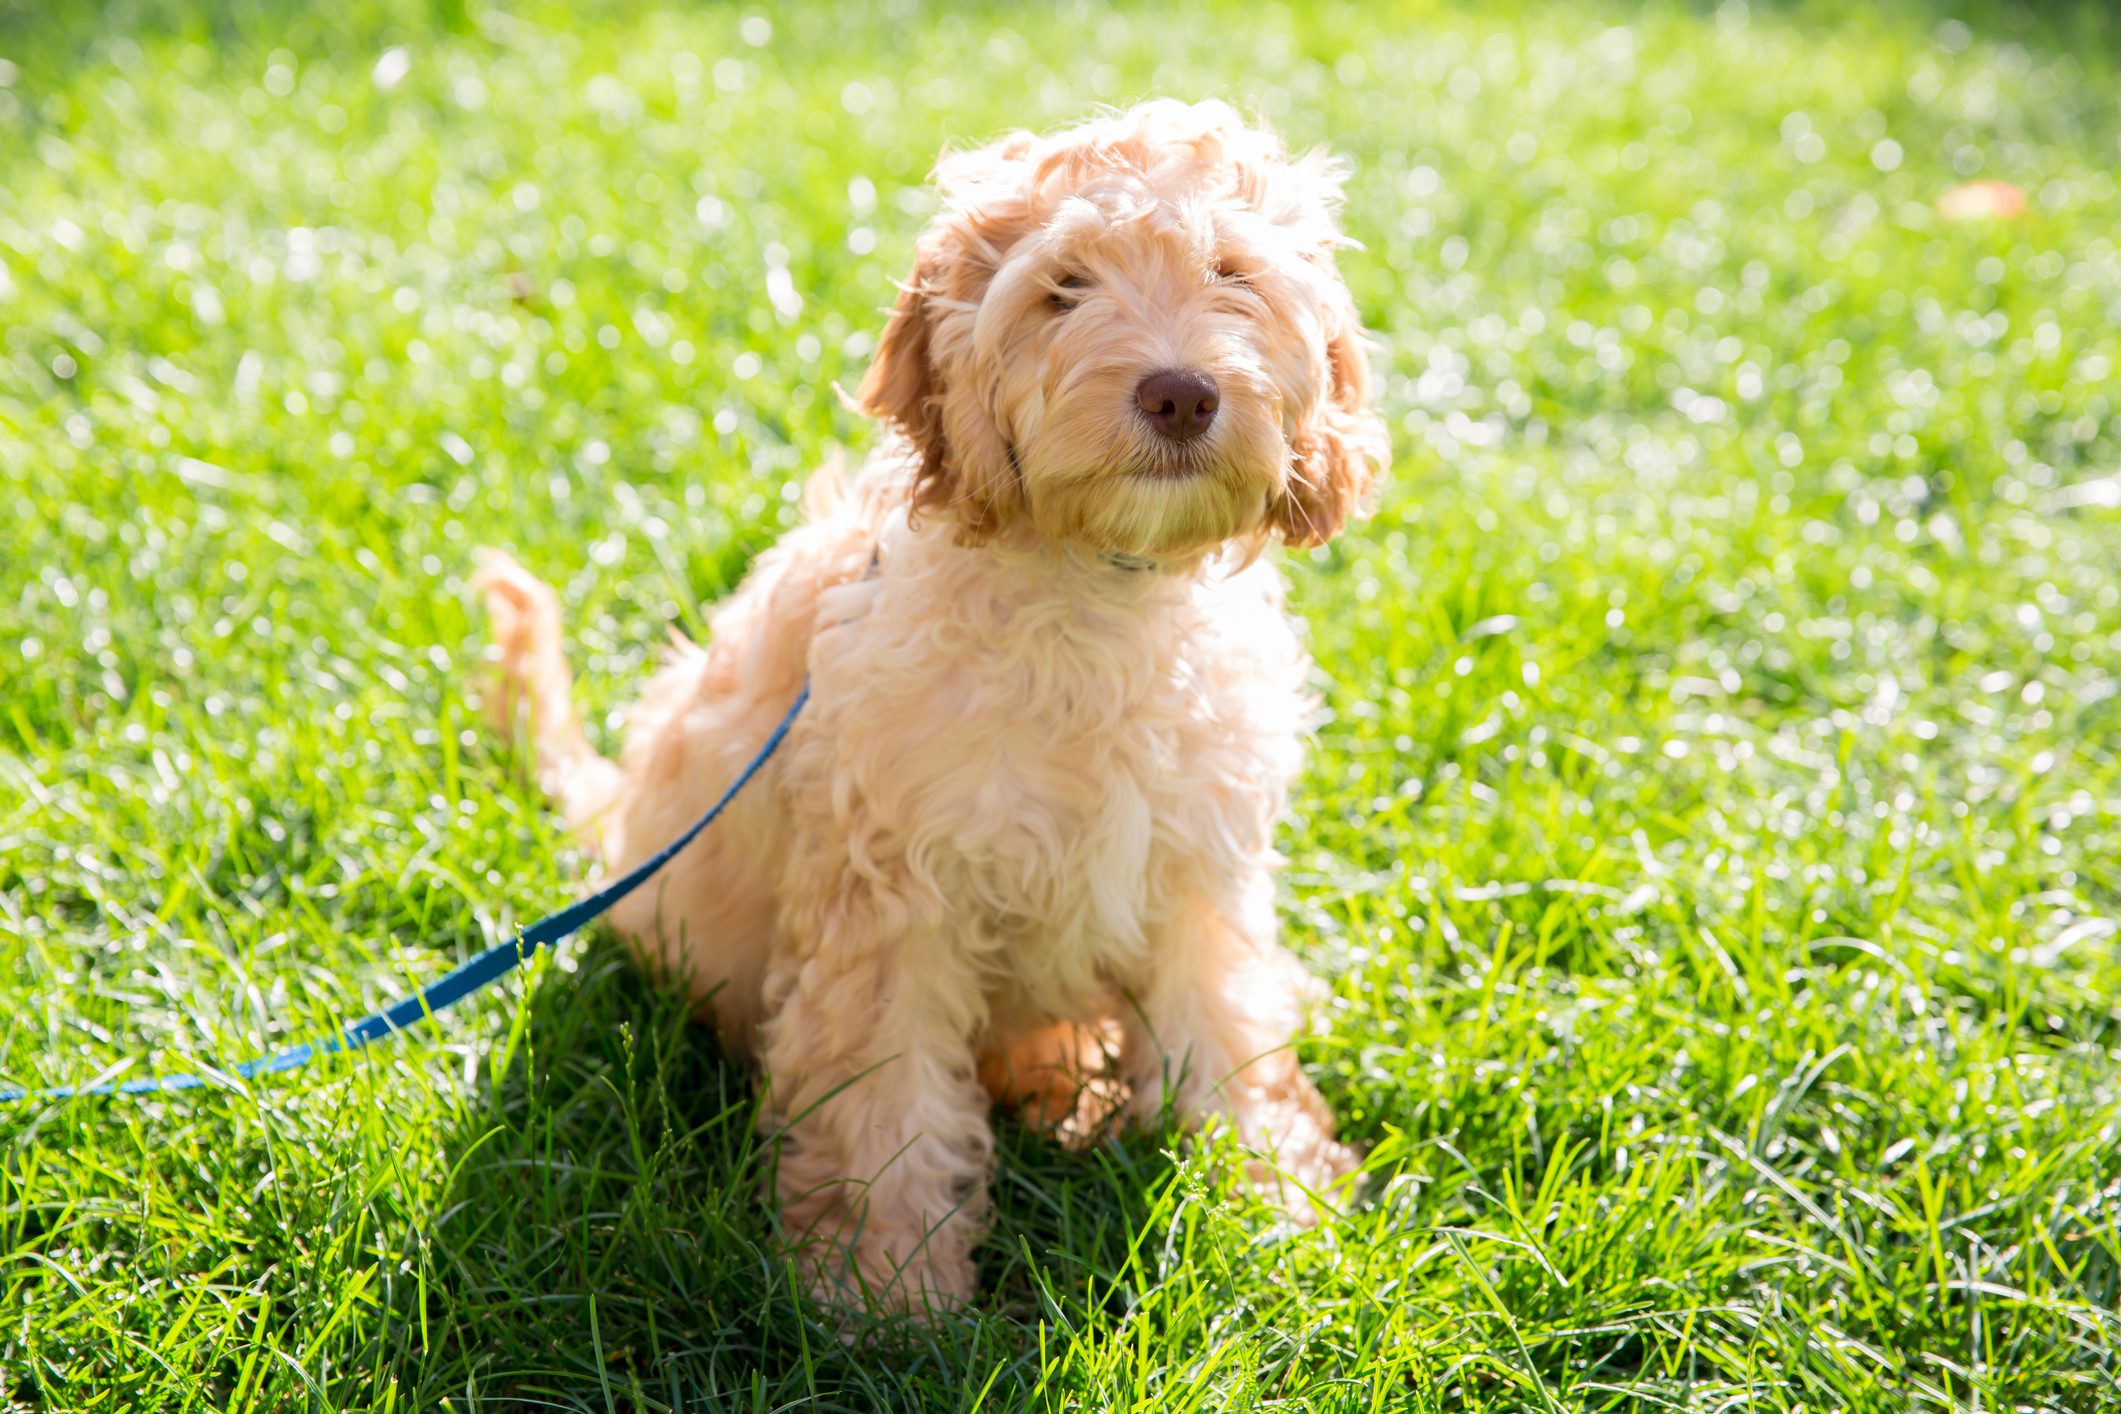 4 month old Cockapoo puppy in the grass